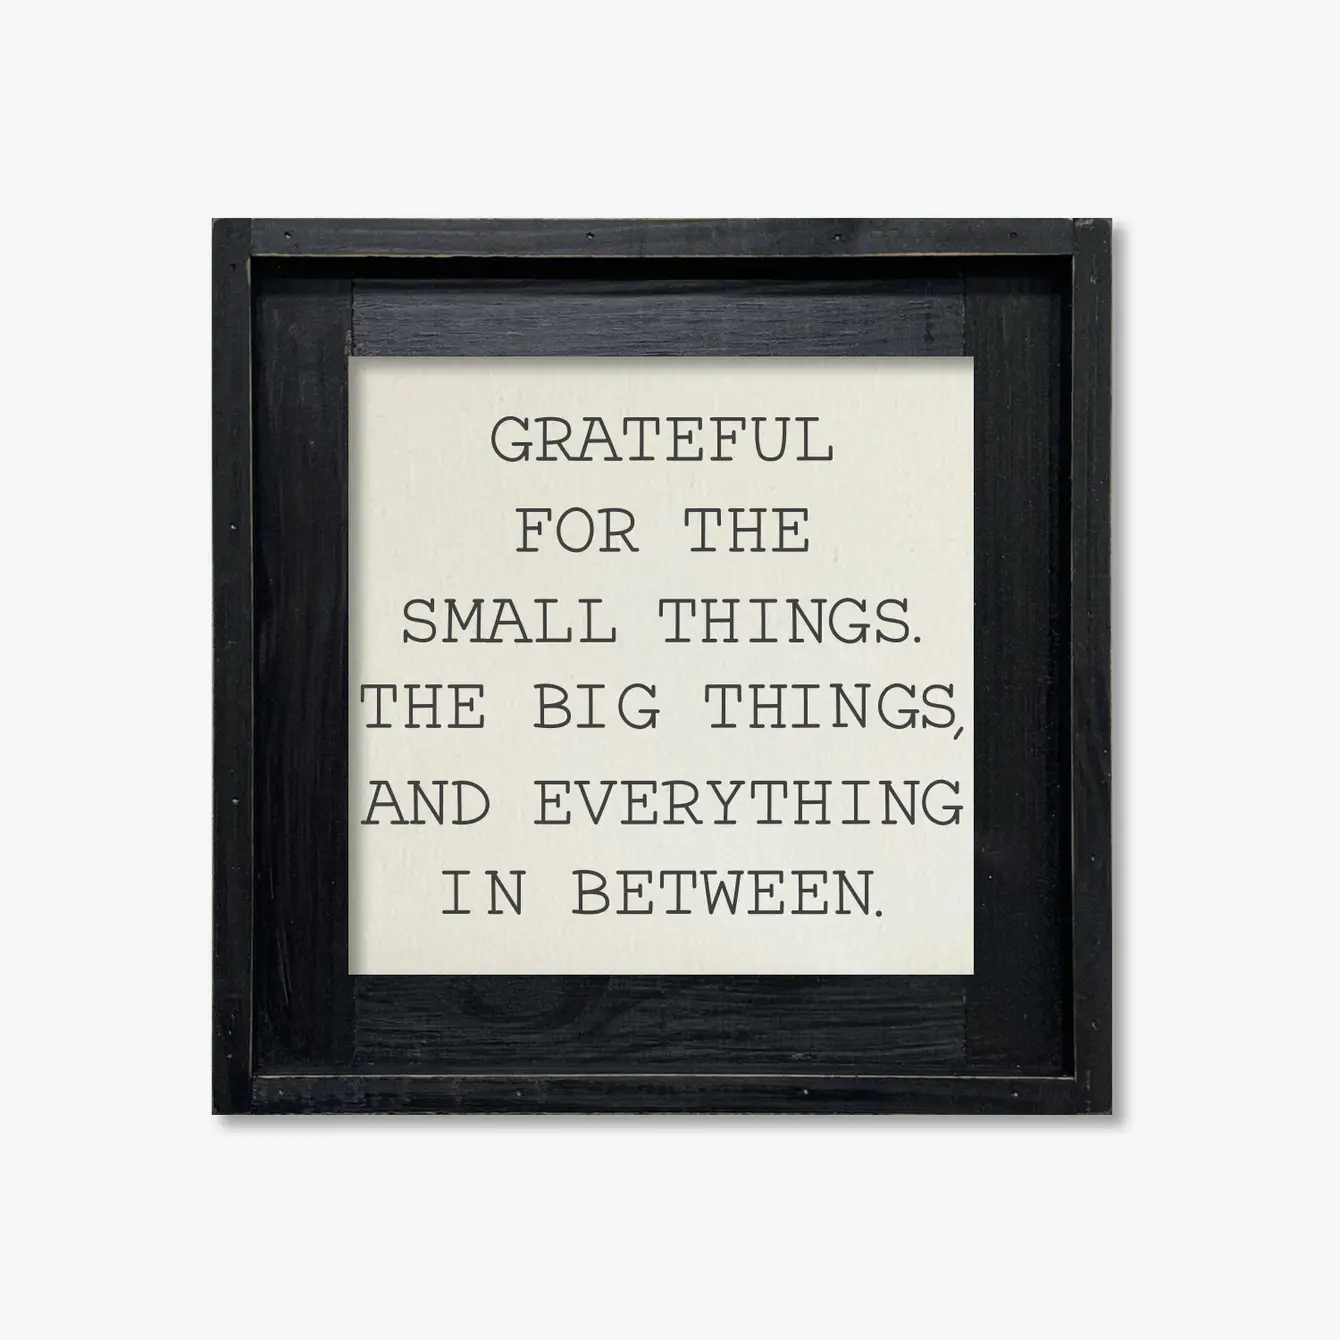 FRAMED CANVAS GRATEFUL FOR THE SMALL THINGS